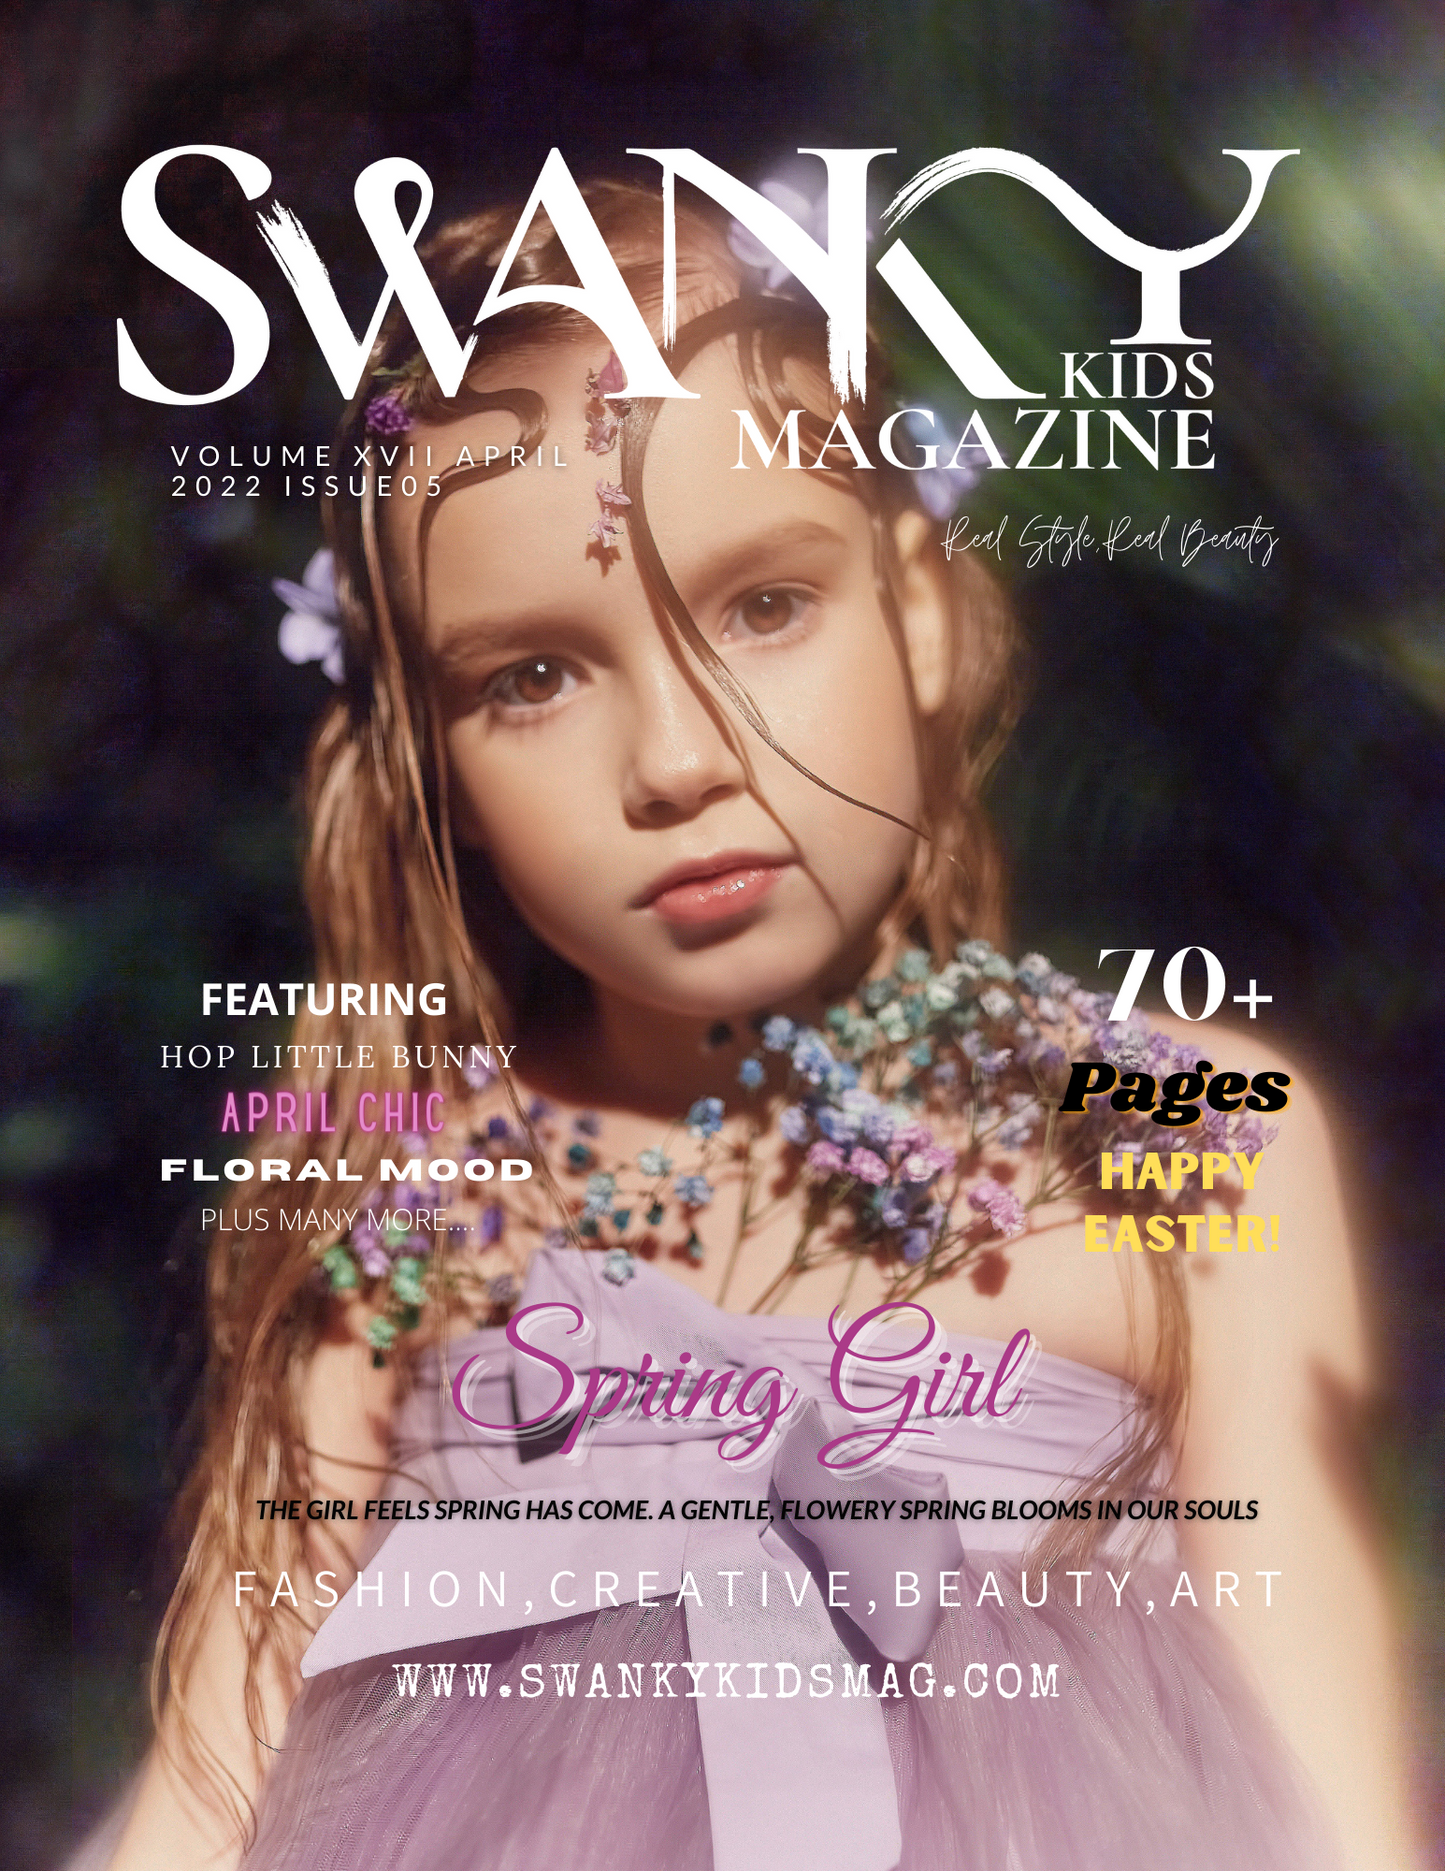 Swanky Kids Magazine Easter Special 2022 VOL XVII Issue 5